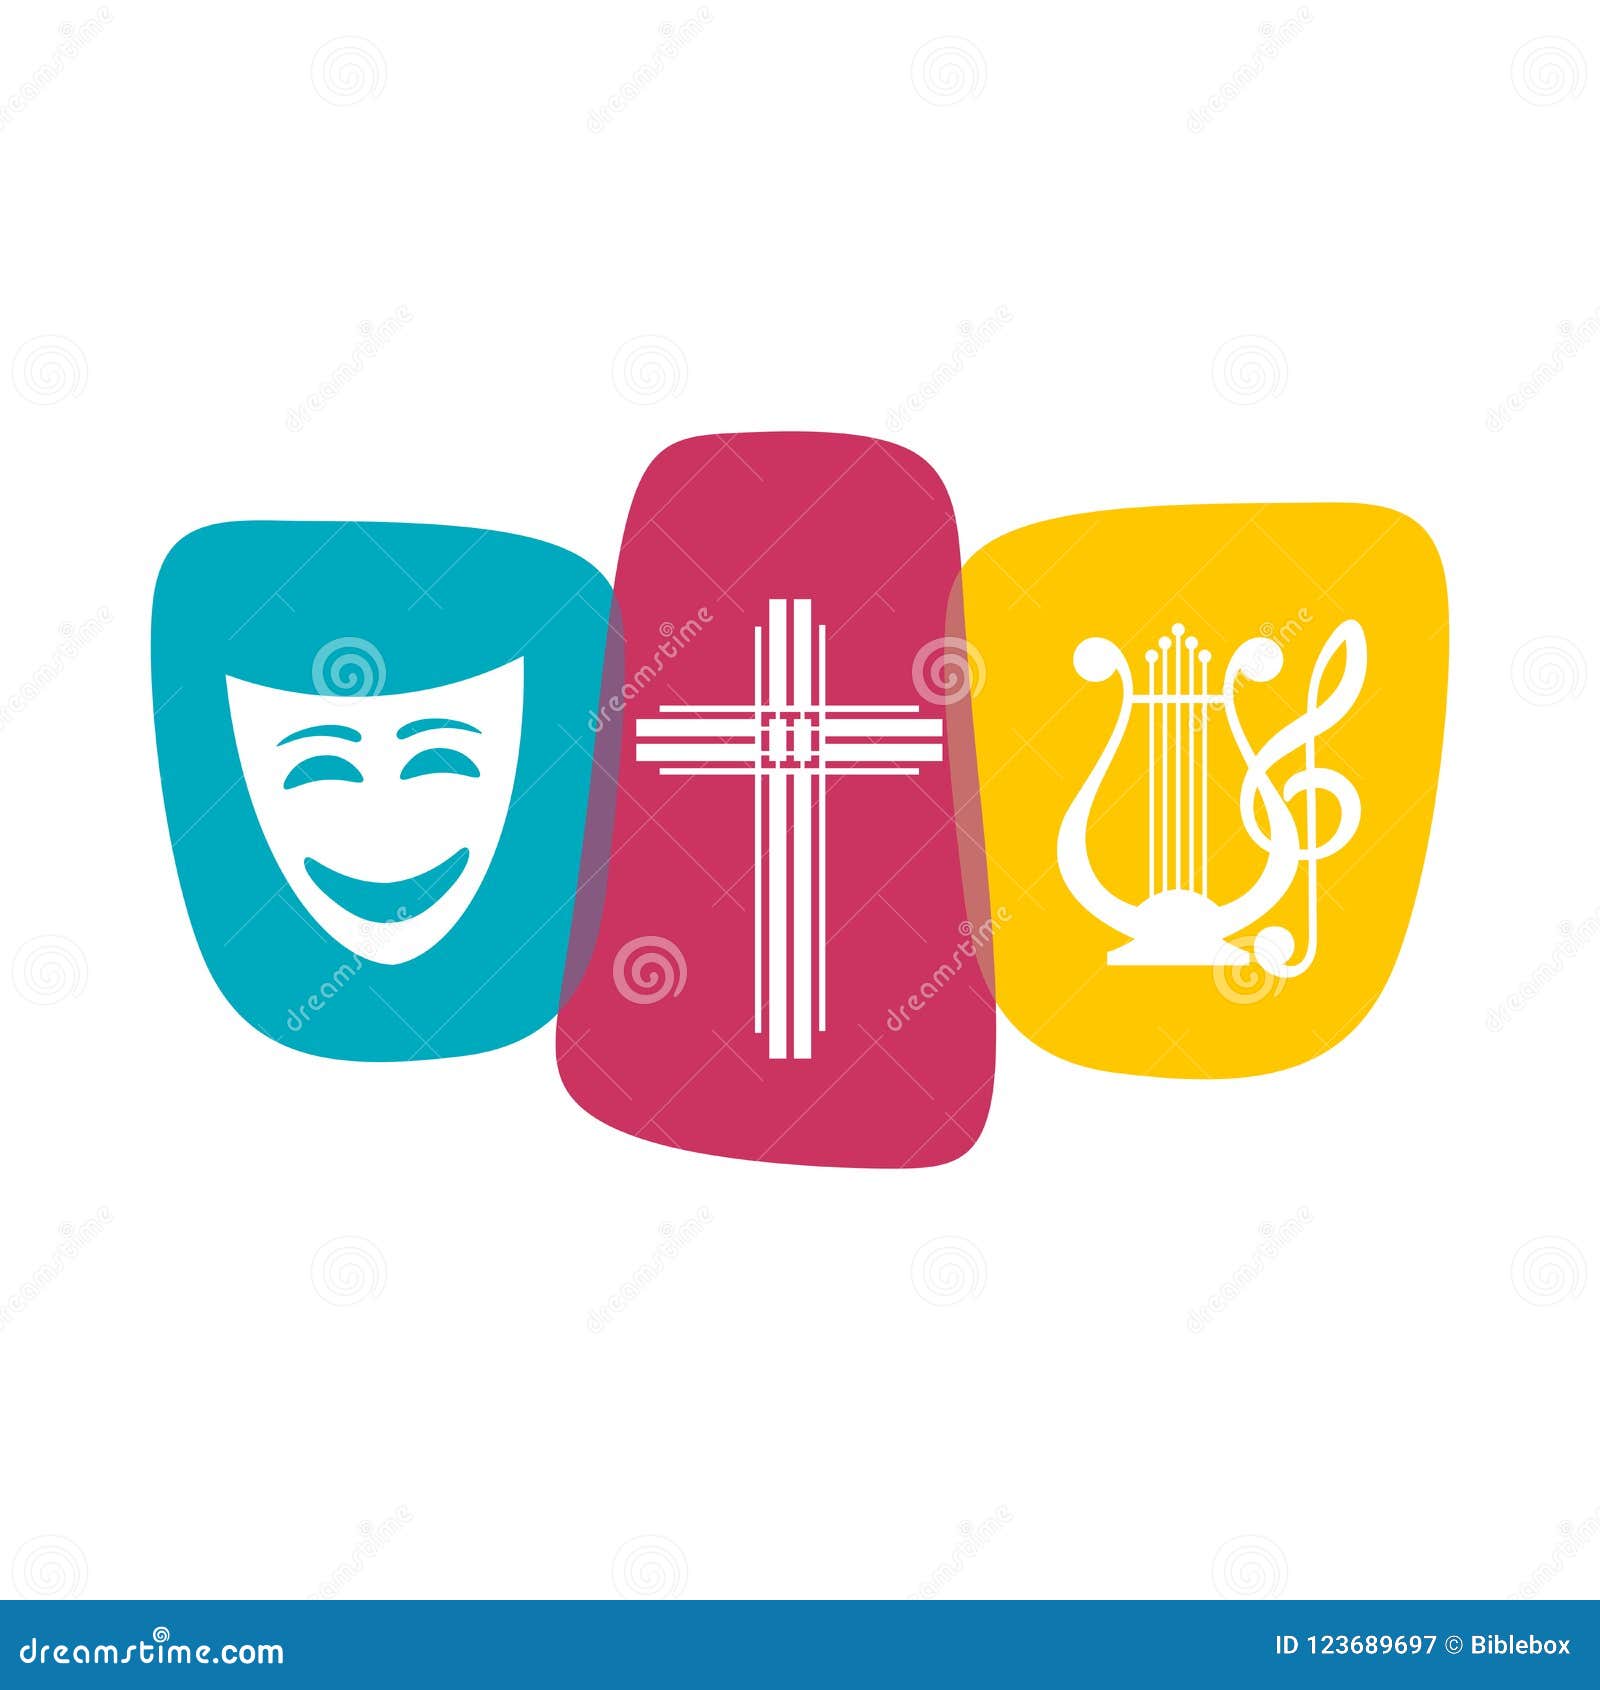 logo of the christian creative team performing theatrical productions, poems, musicals.